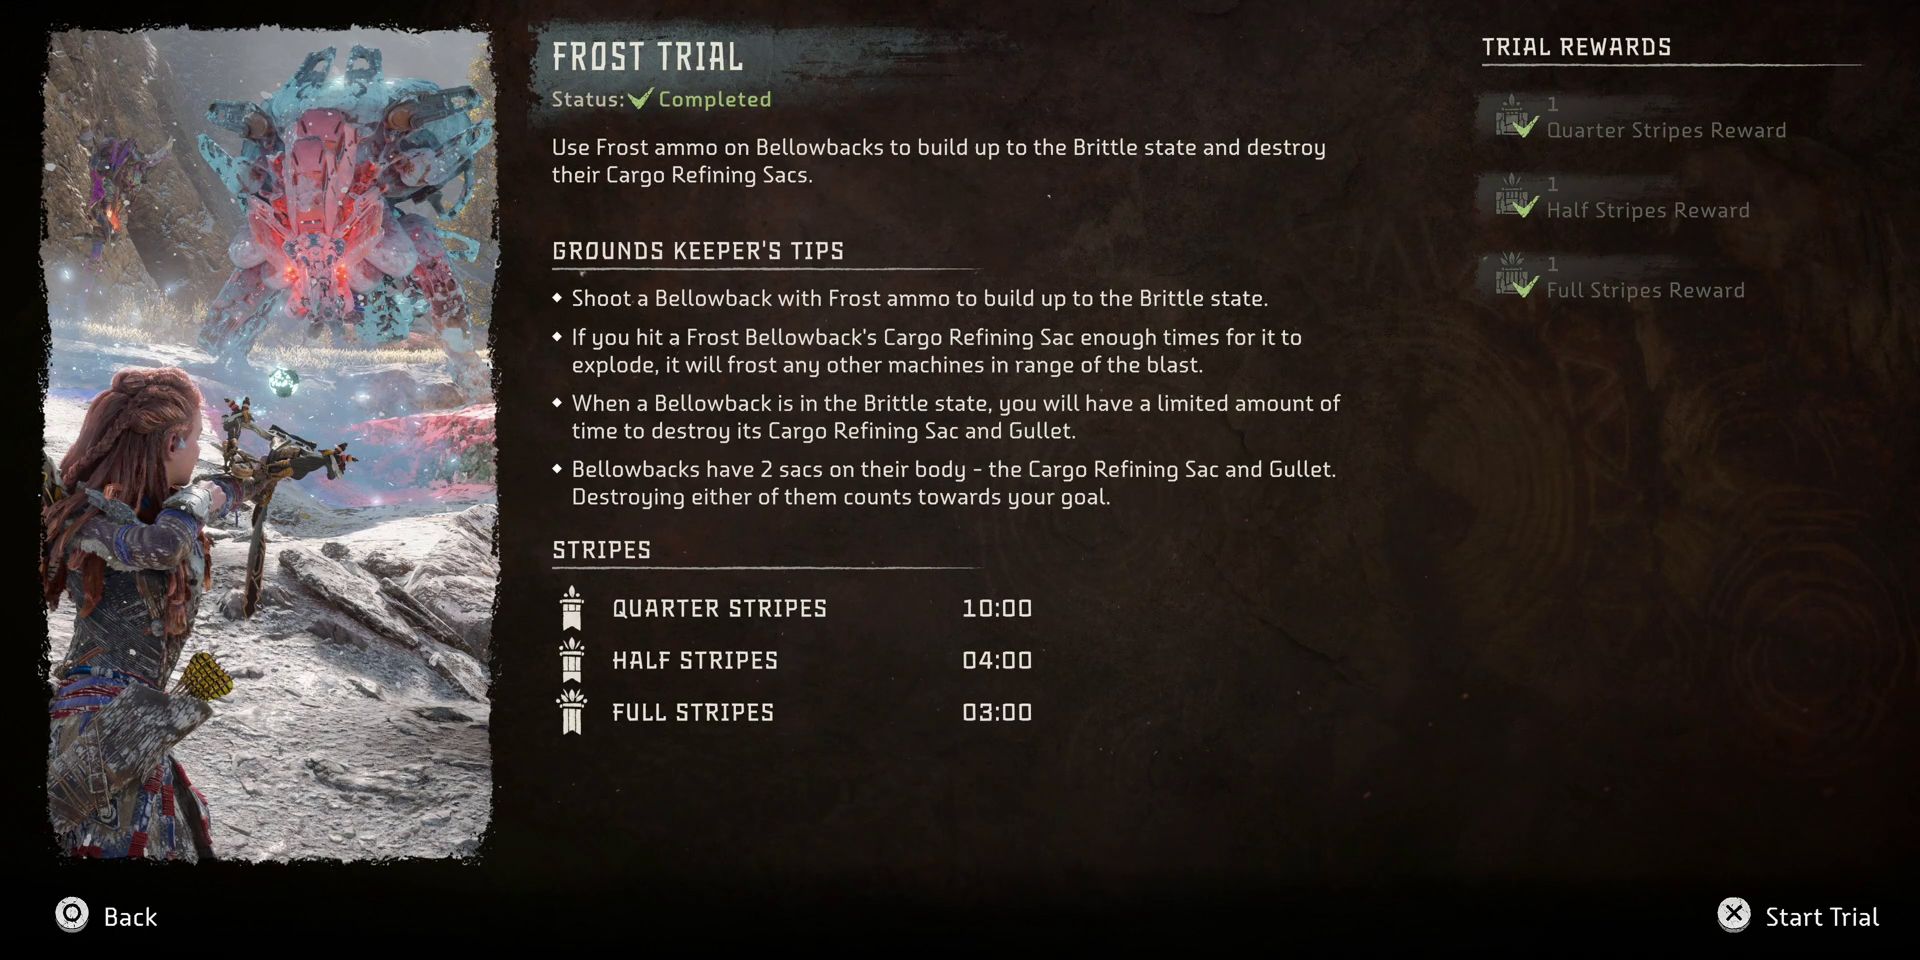 horizon-forbidden-west-sheerside-mountains-hunting-grounds-guide-01-frost-trial-info